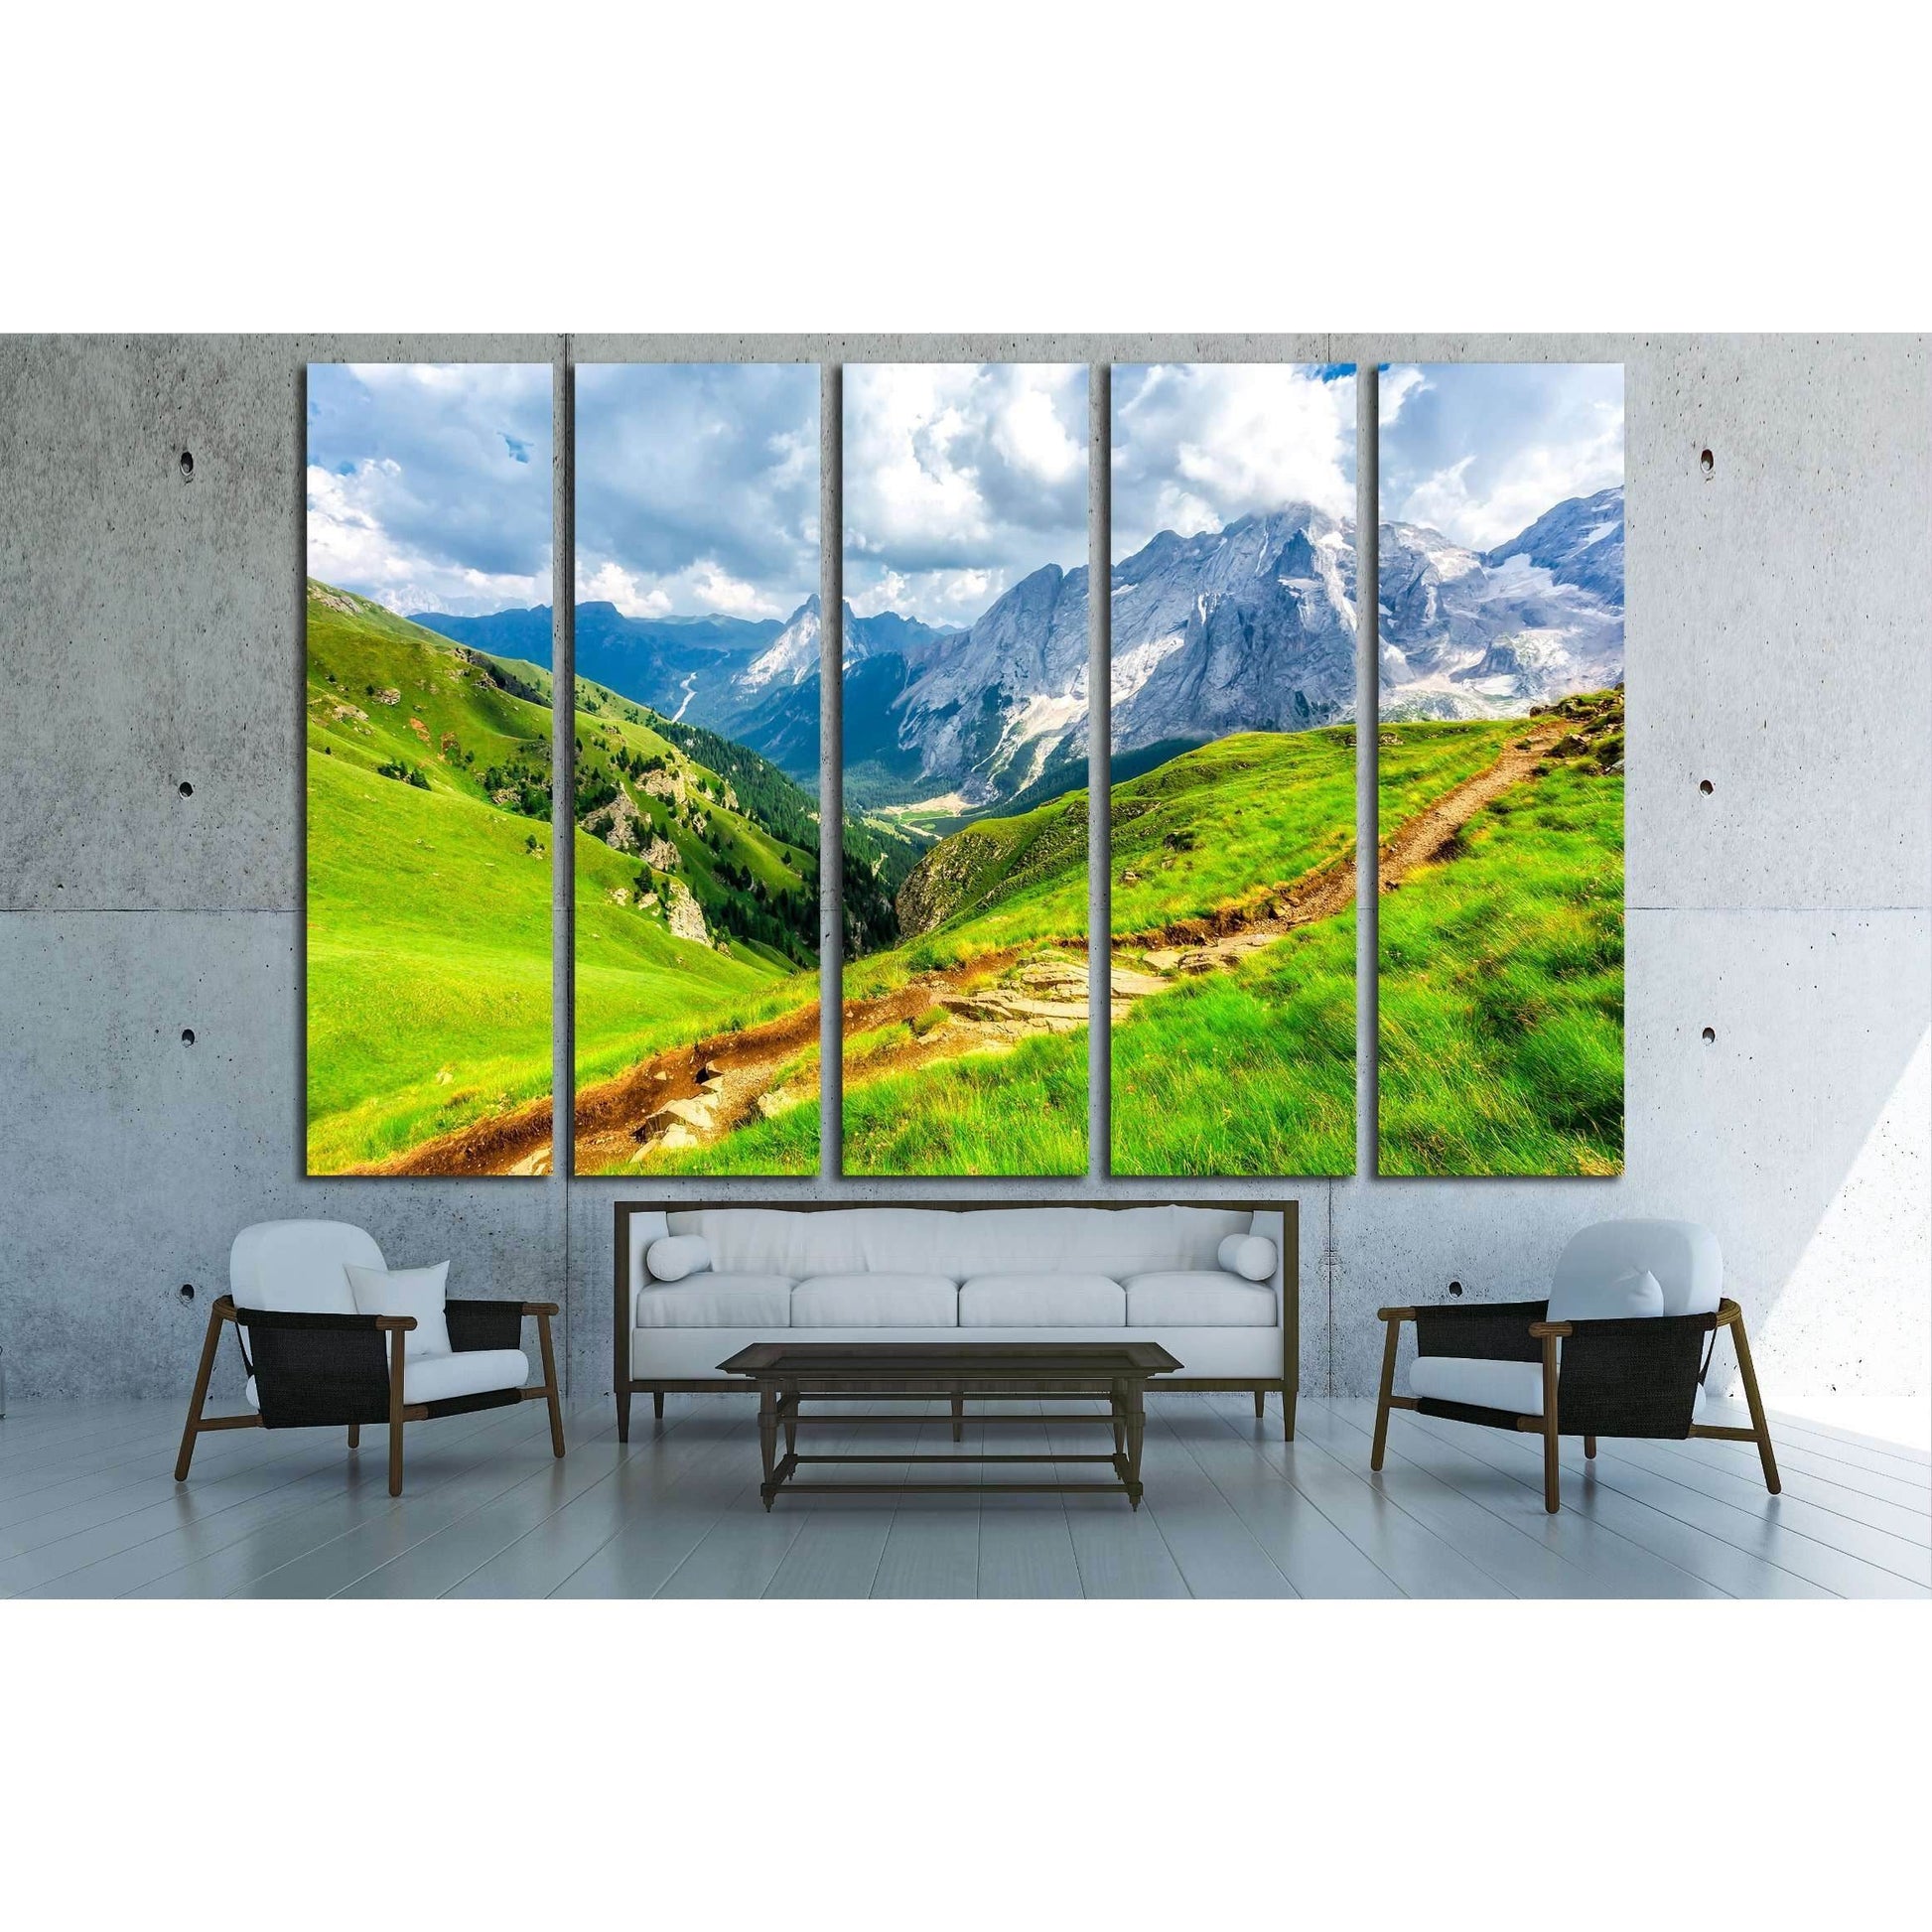 Alpine Trail and Mountain Peaks Canvas Print for Nature Inspired InteriorsThis canvas print captures a lush alpine landscape with a vivid green trail leading into the distance toward majestic mountain peaks. It evokes a sense of adventure and the refreshi